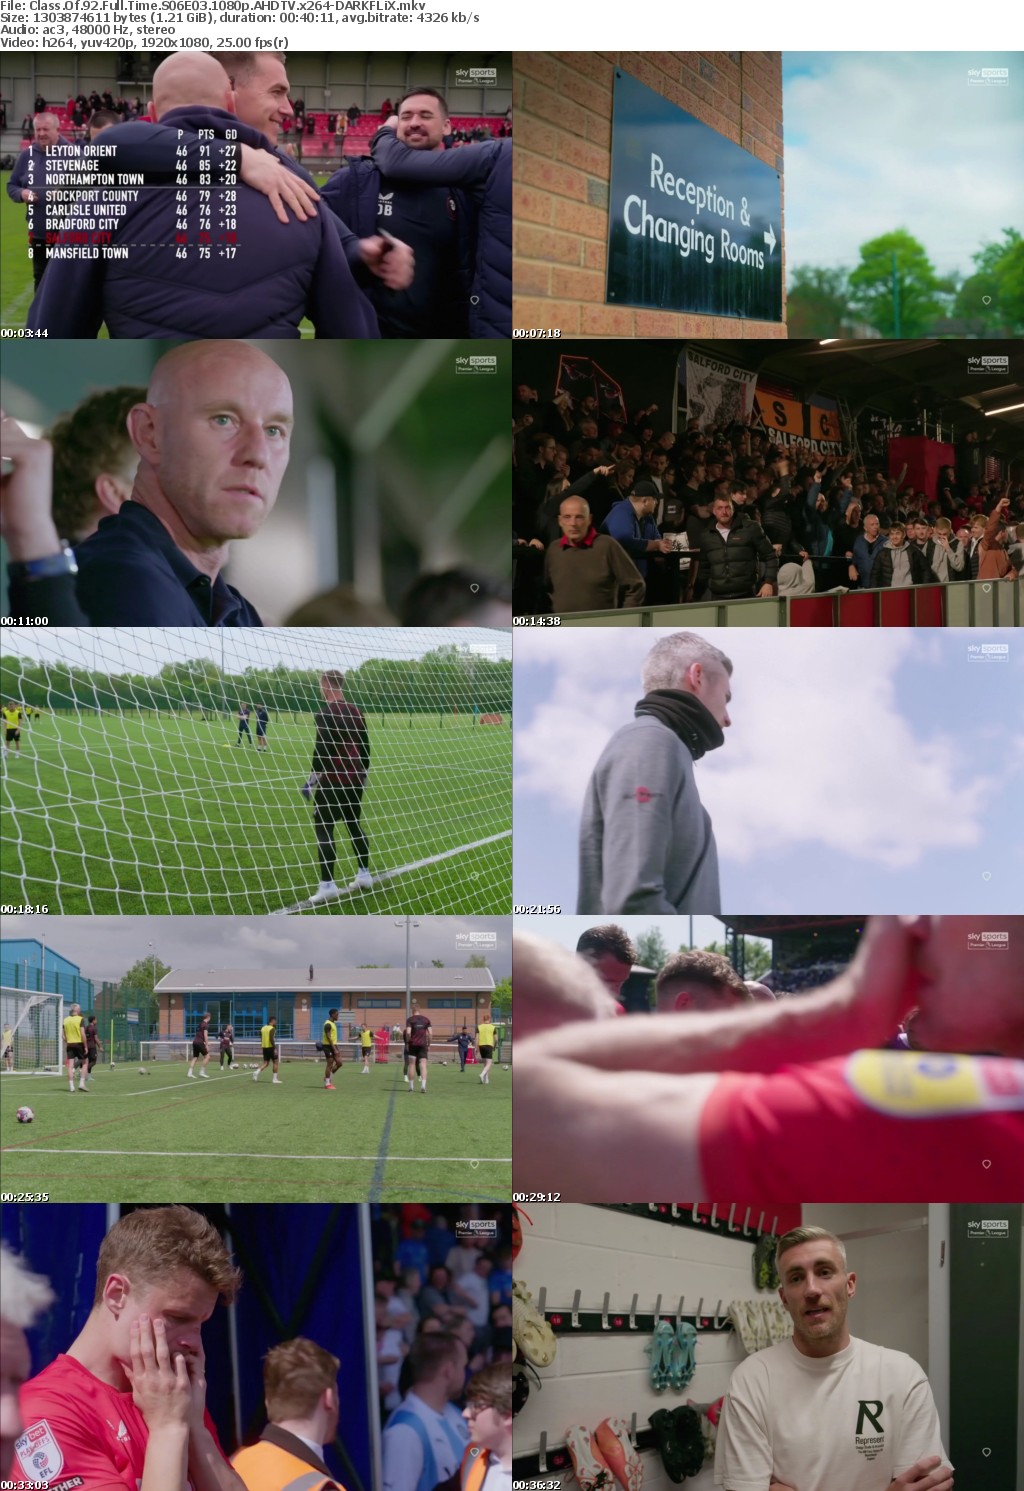 Class Of 92 Full Time S06E03 1080p AHDTV x264-DARKFLiX